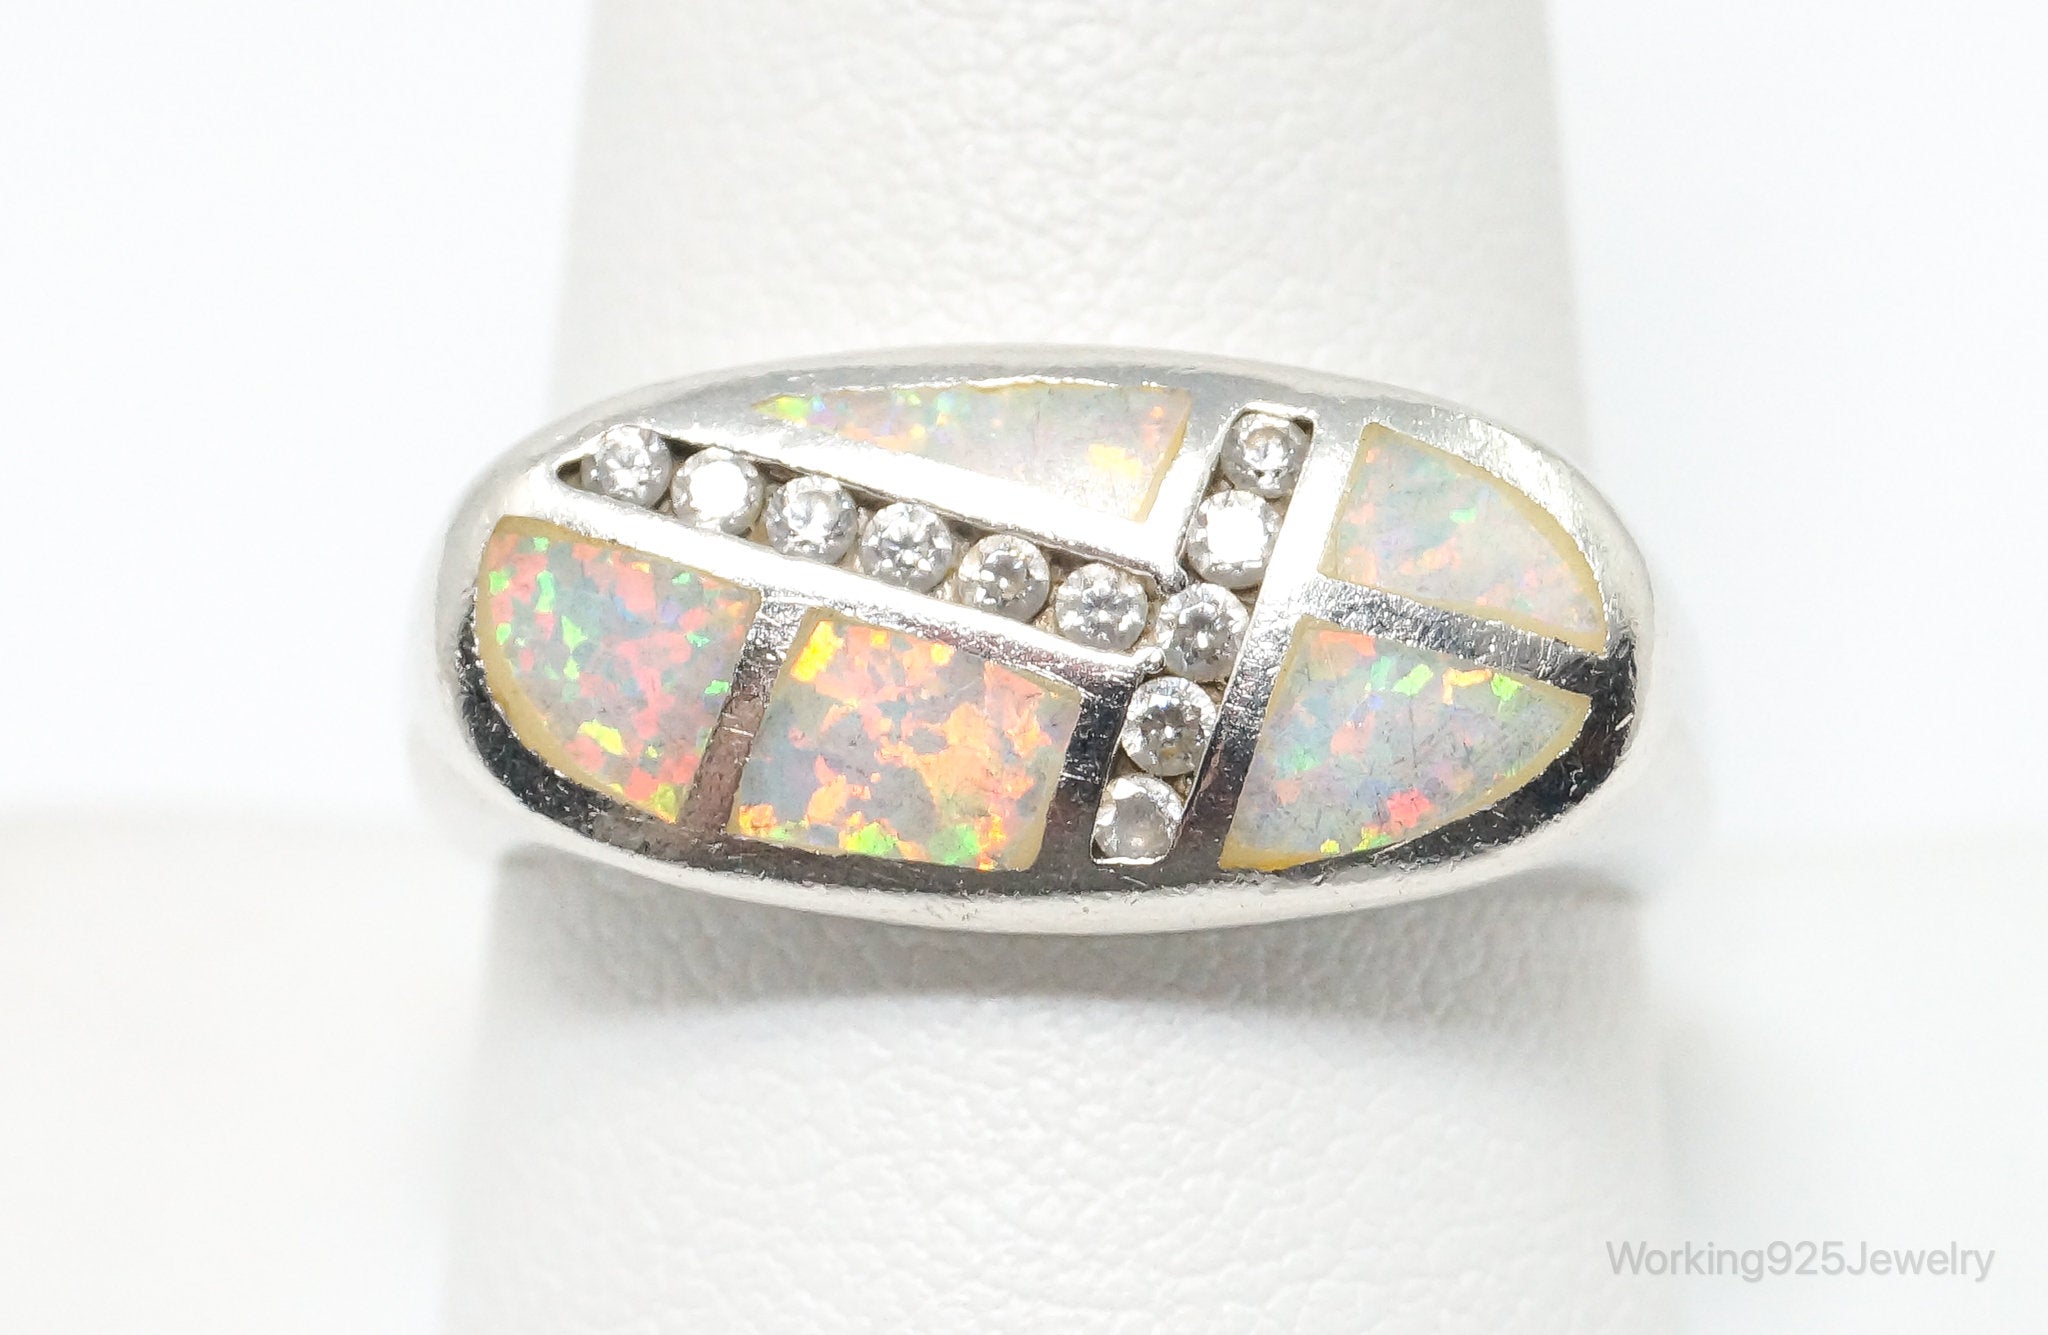 Vintage Art Deco Style Opal CZ Accented Sterling Silver Ring - Size 9.75